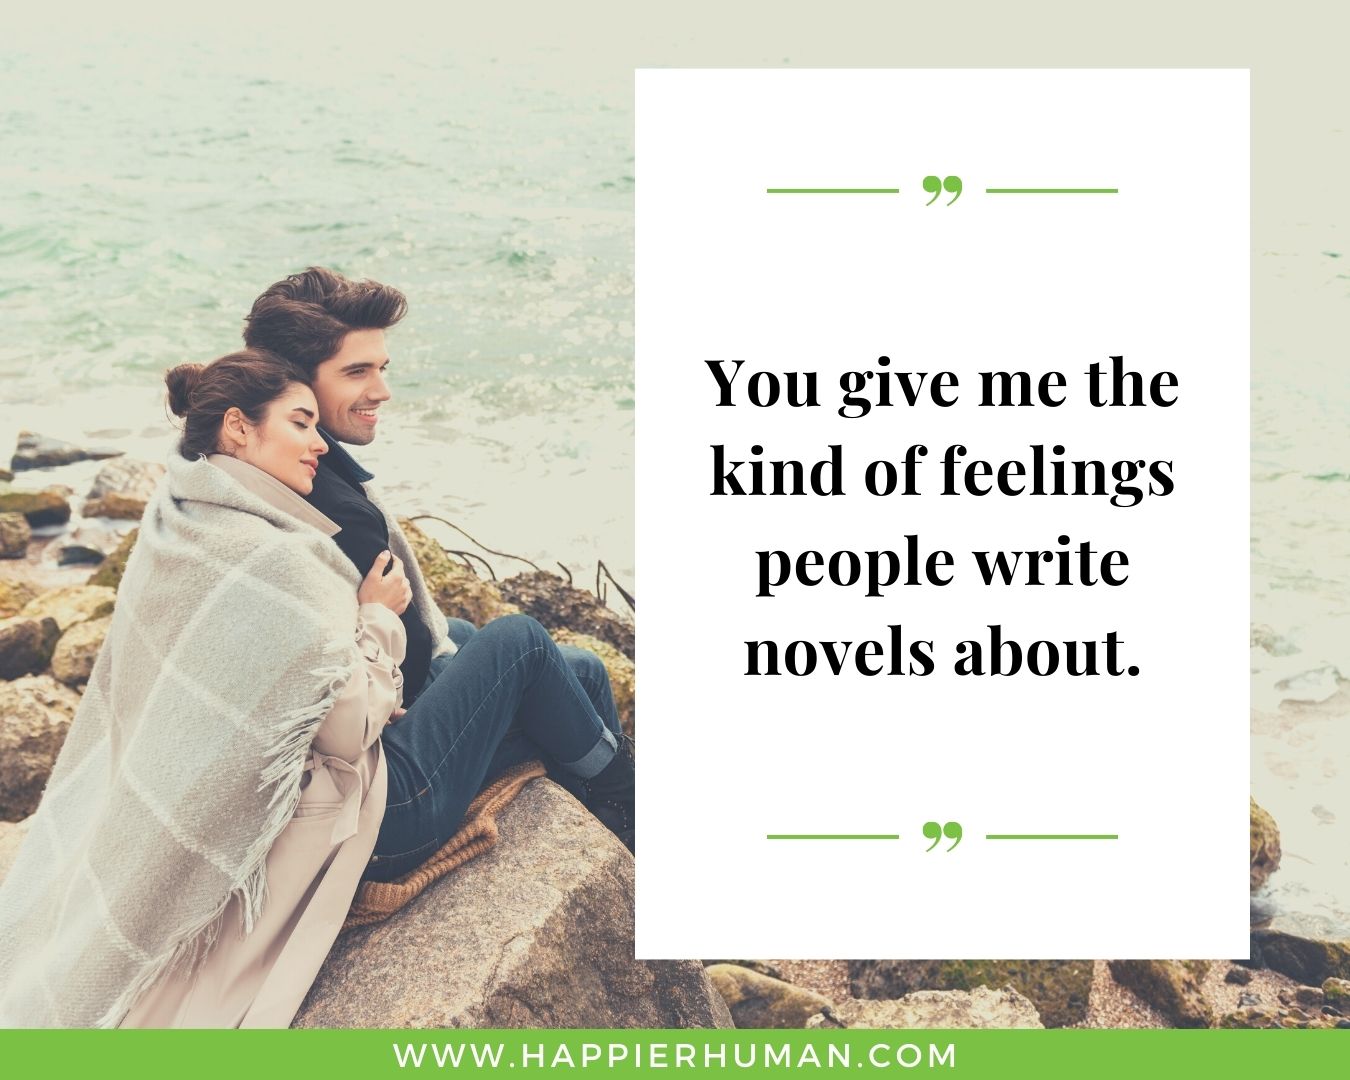 Sweet and Romantic Love Quotes for Her - “You give me the kind of feelings people write novels about.”